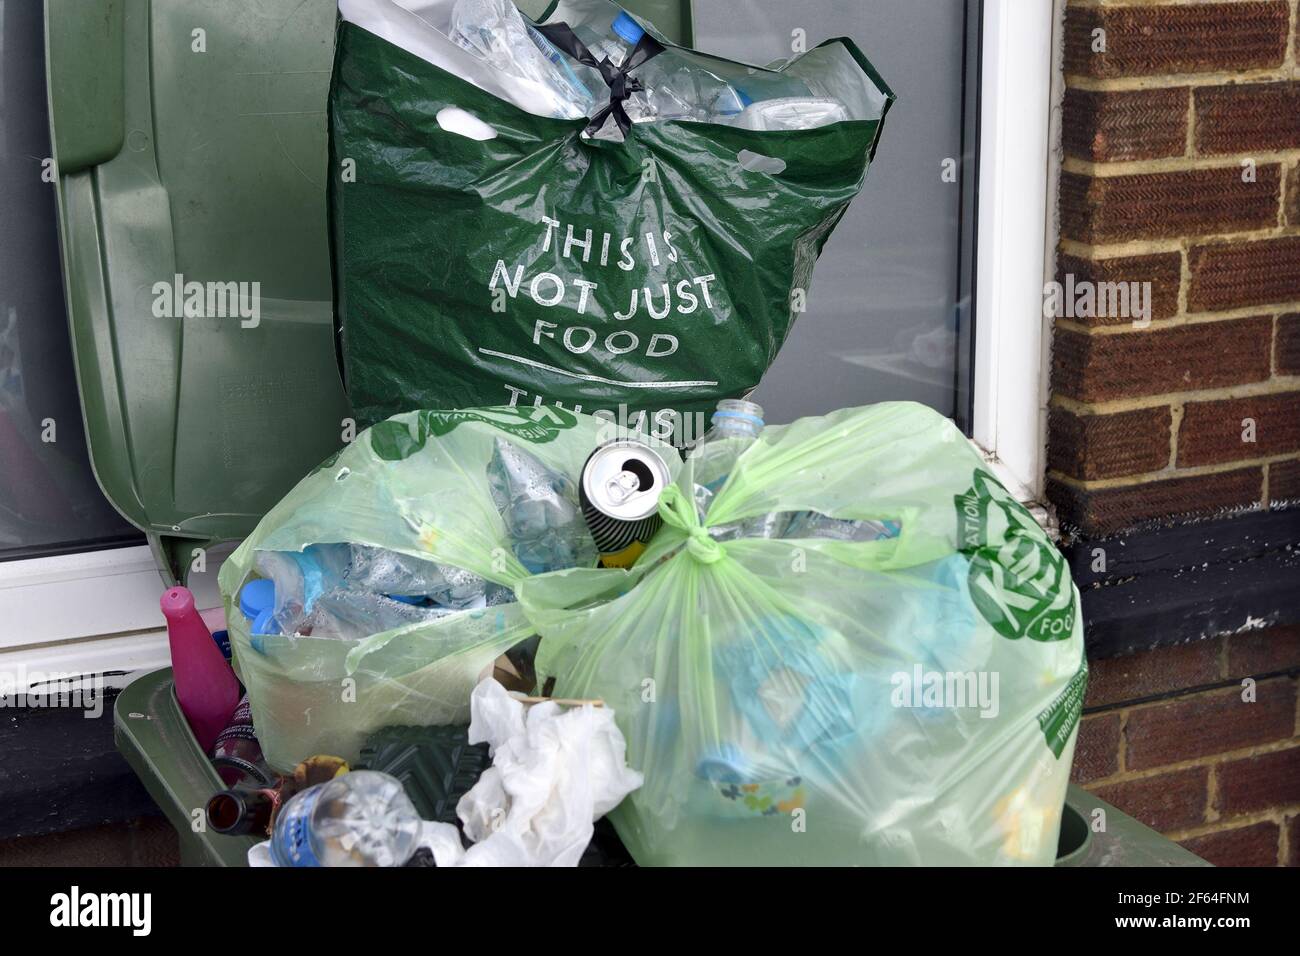 https://c8.alamy.com/comp/2F64FNM/maidstone-kent-uk-overflowing-rubbish-bin-with-marks-and-spencer-carrier-bag-this-is-not-just-food-2F64FNM.jpg